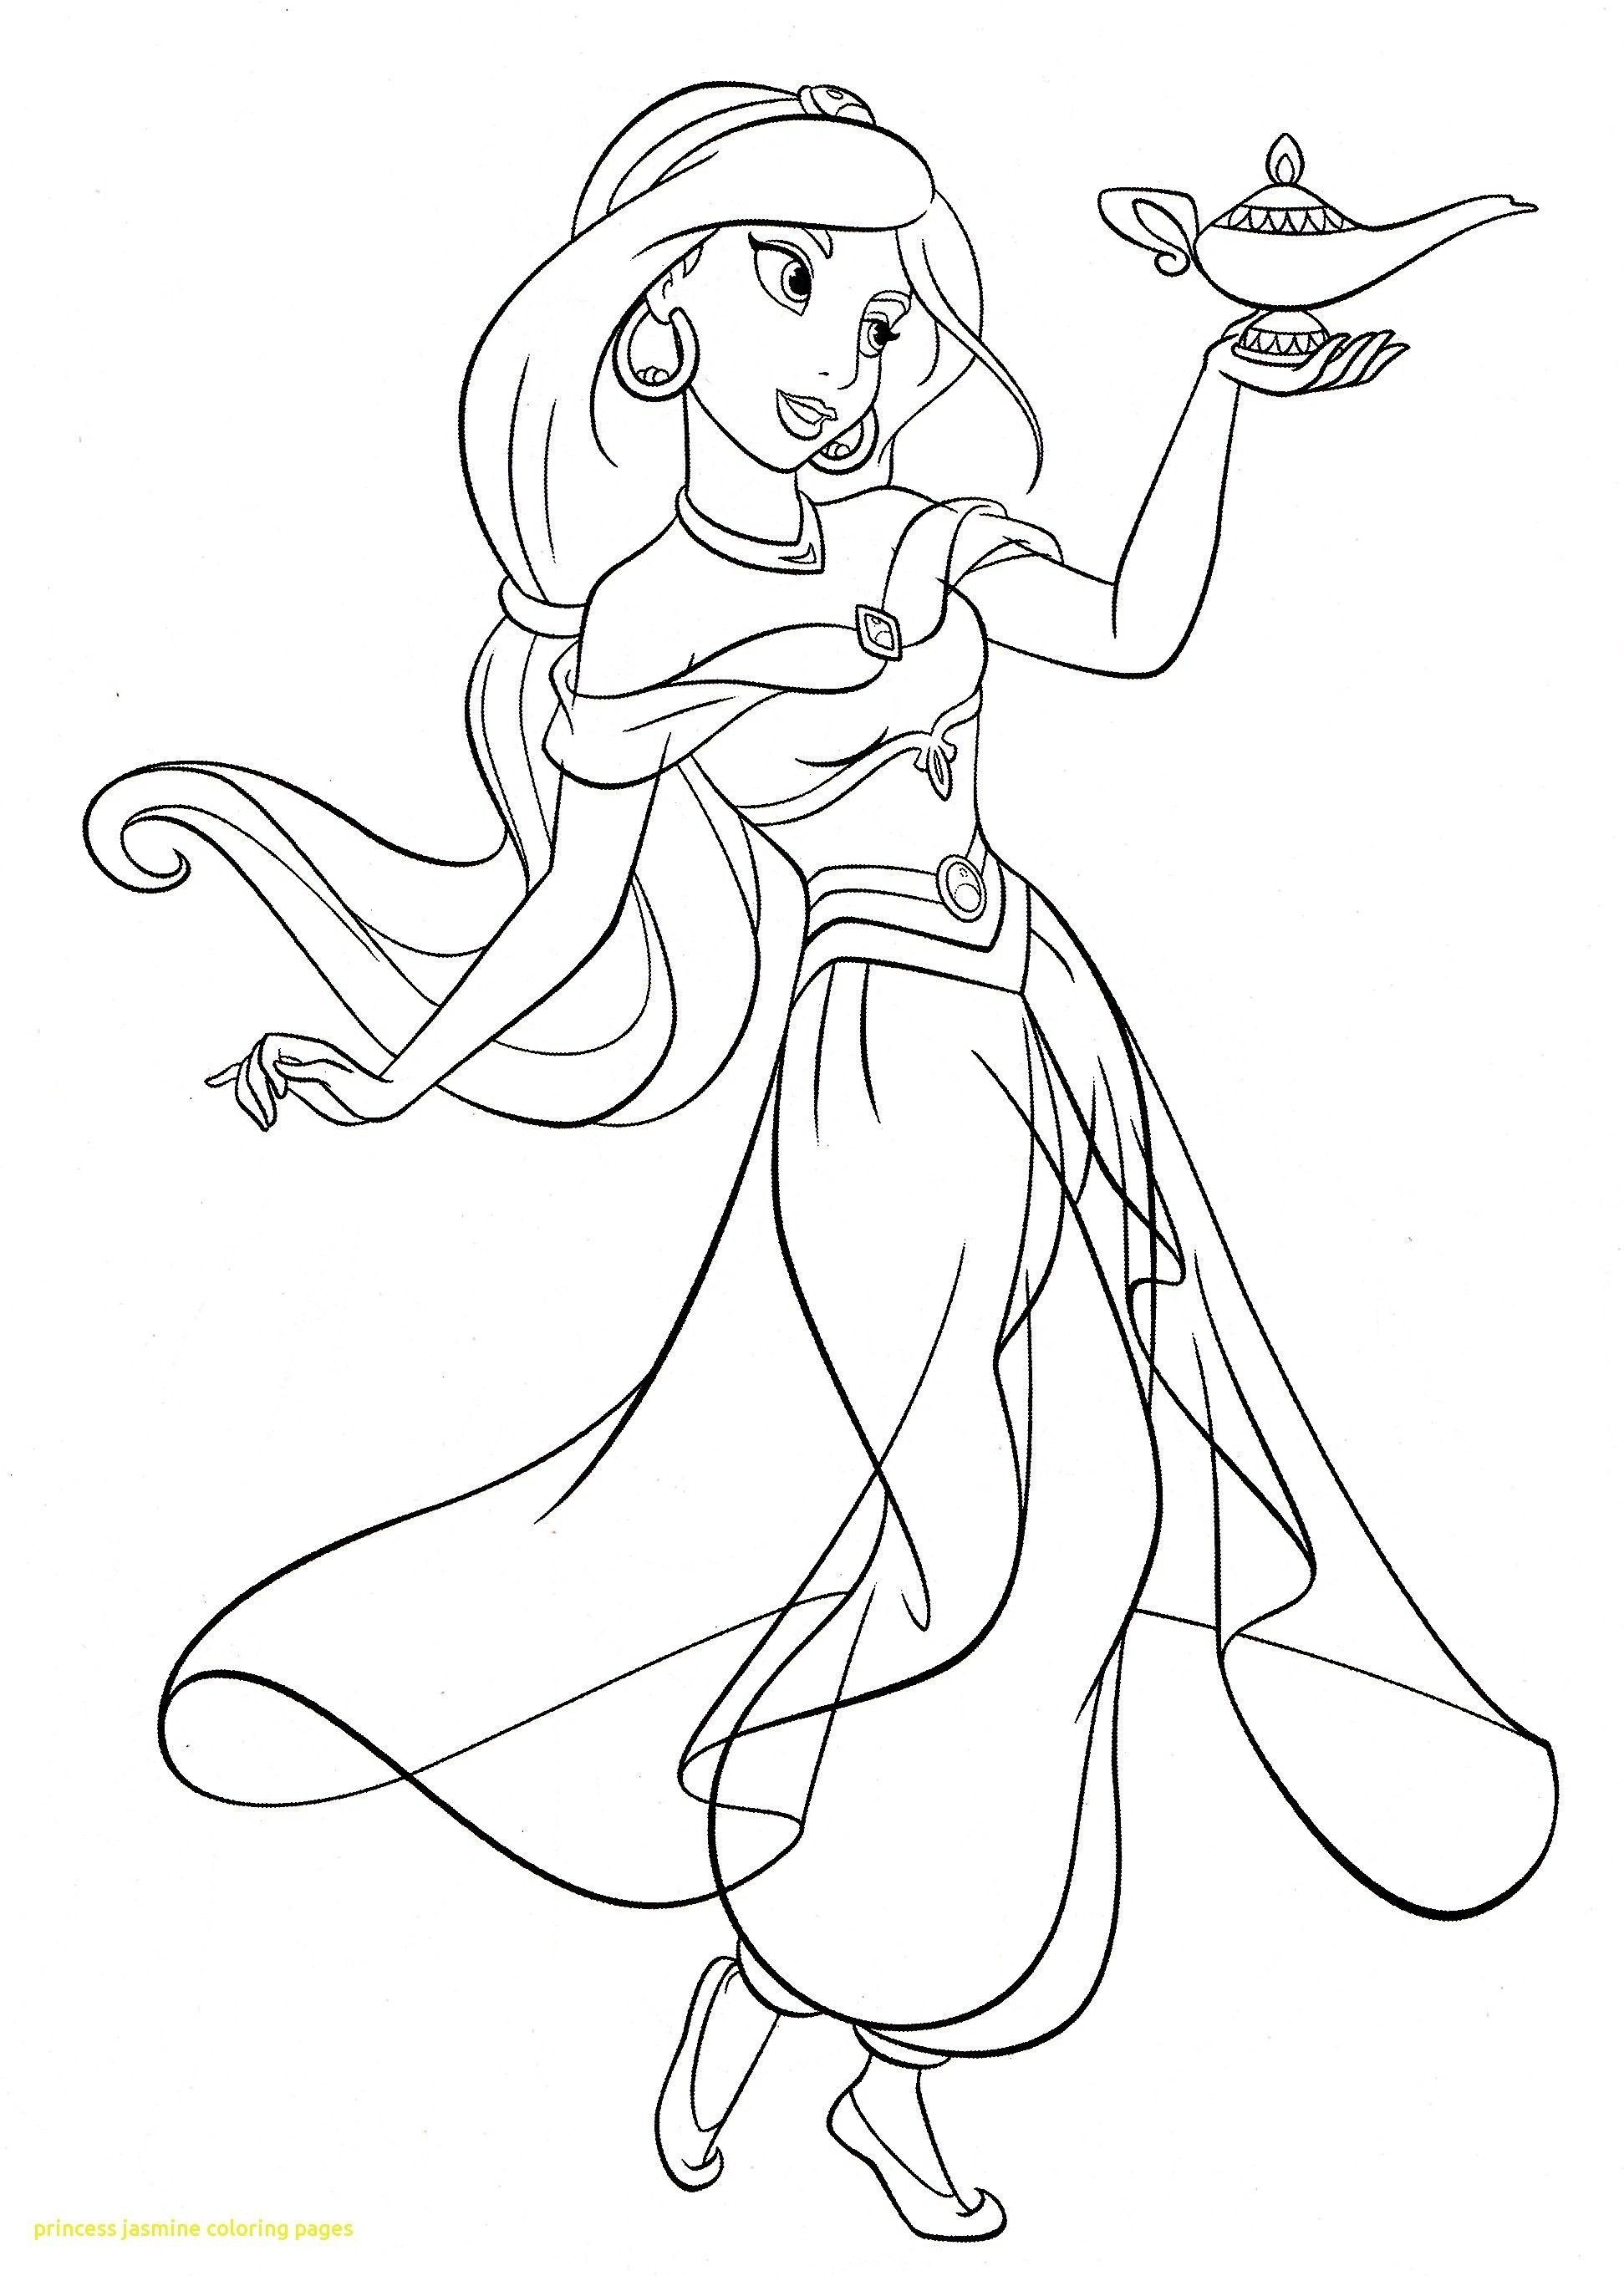 Coloring pages populor cartoon charactors aladdin coloring pages